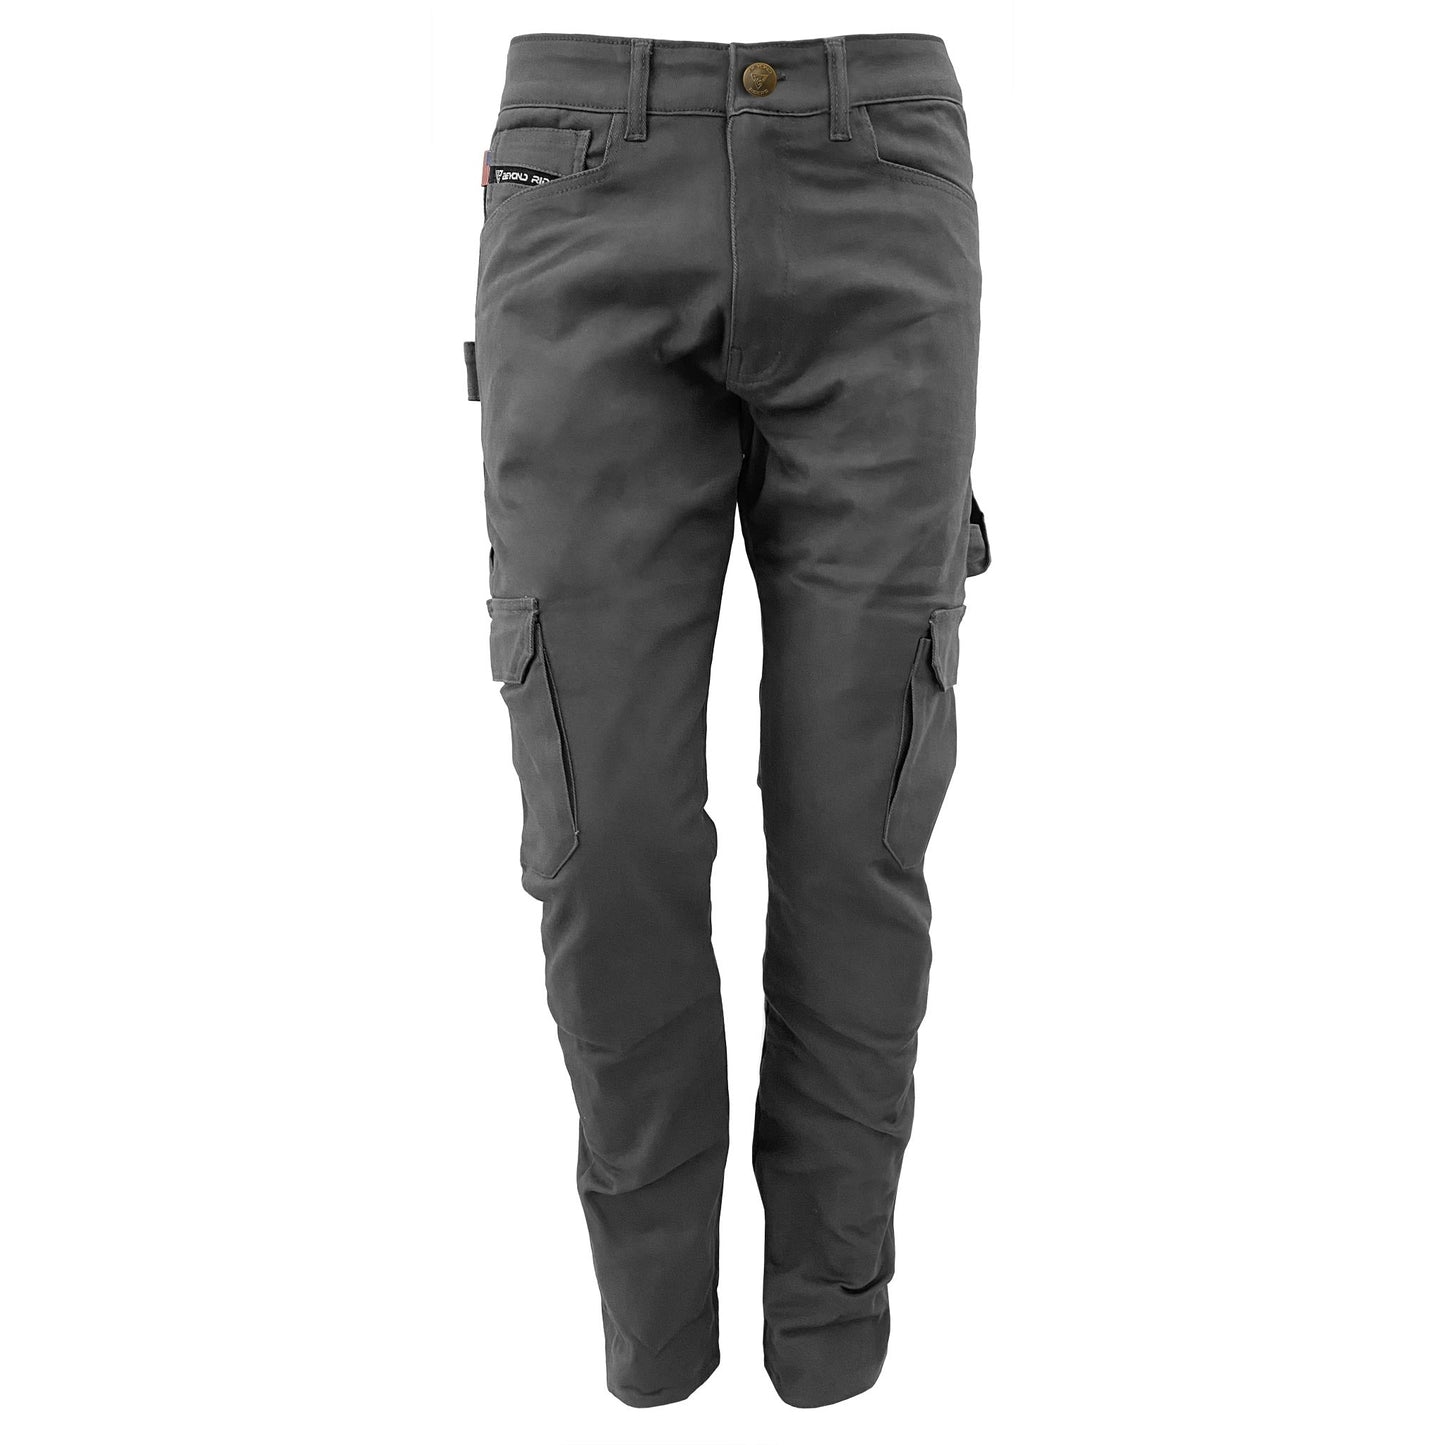 Straight Leg Cargo Pants - Gray with Pads - REVRides